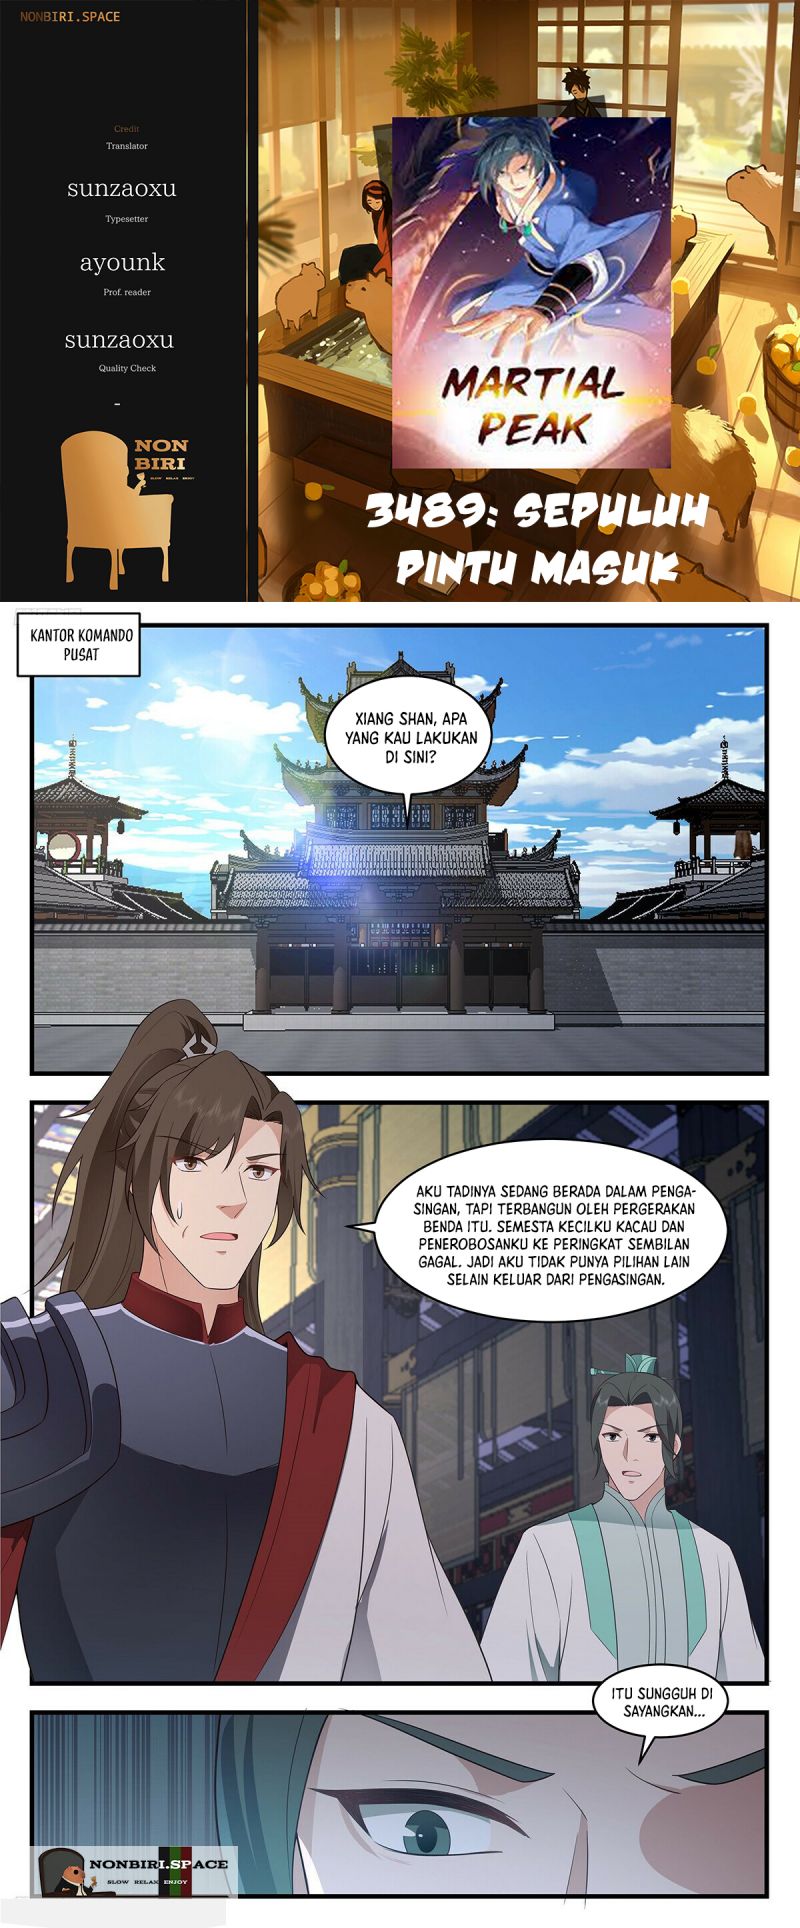 Martial Peak: Chapter 3489 - Page 1